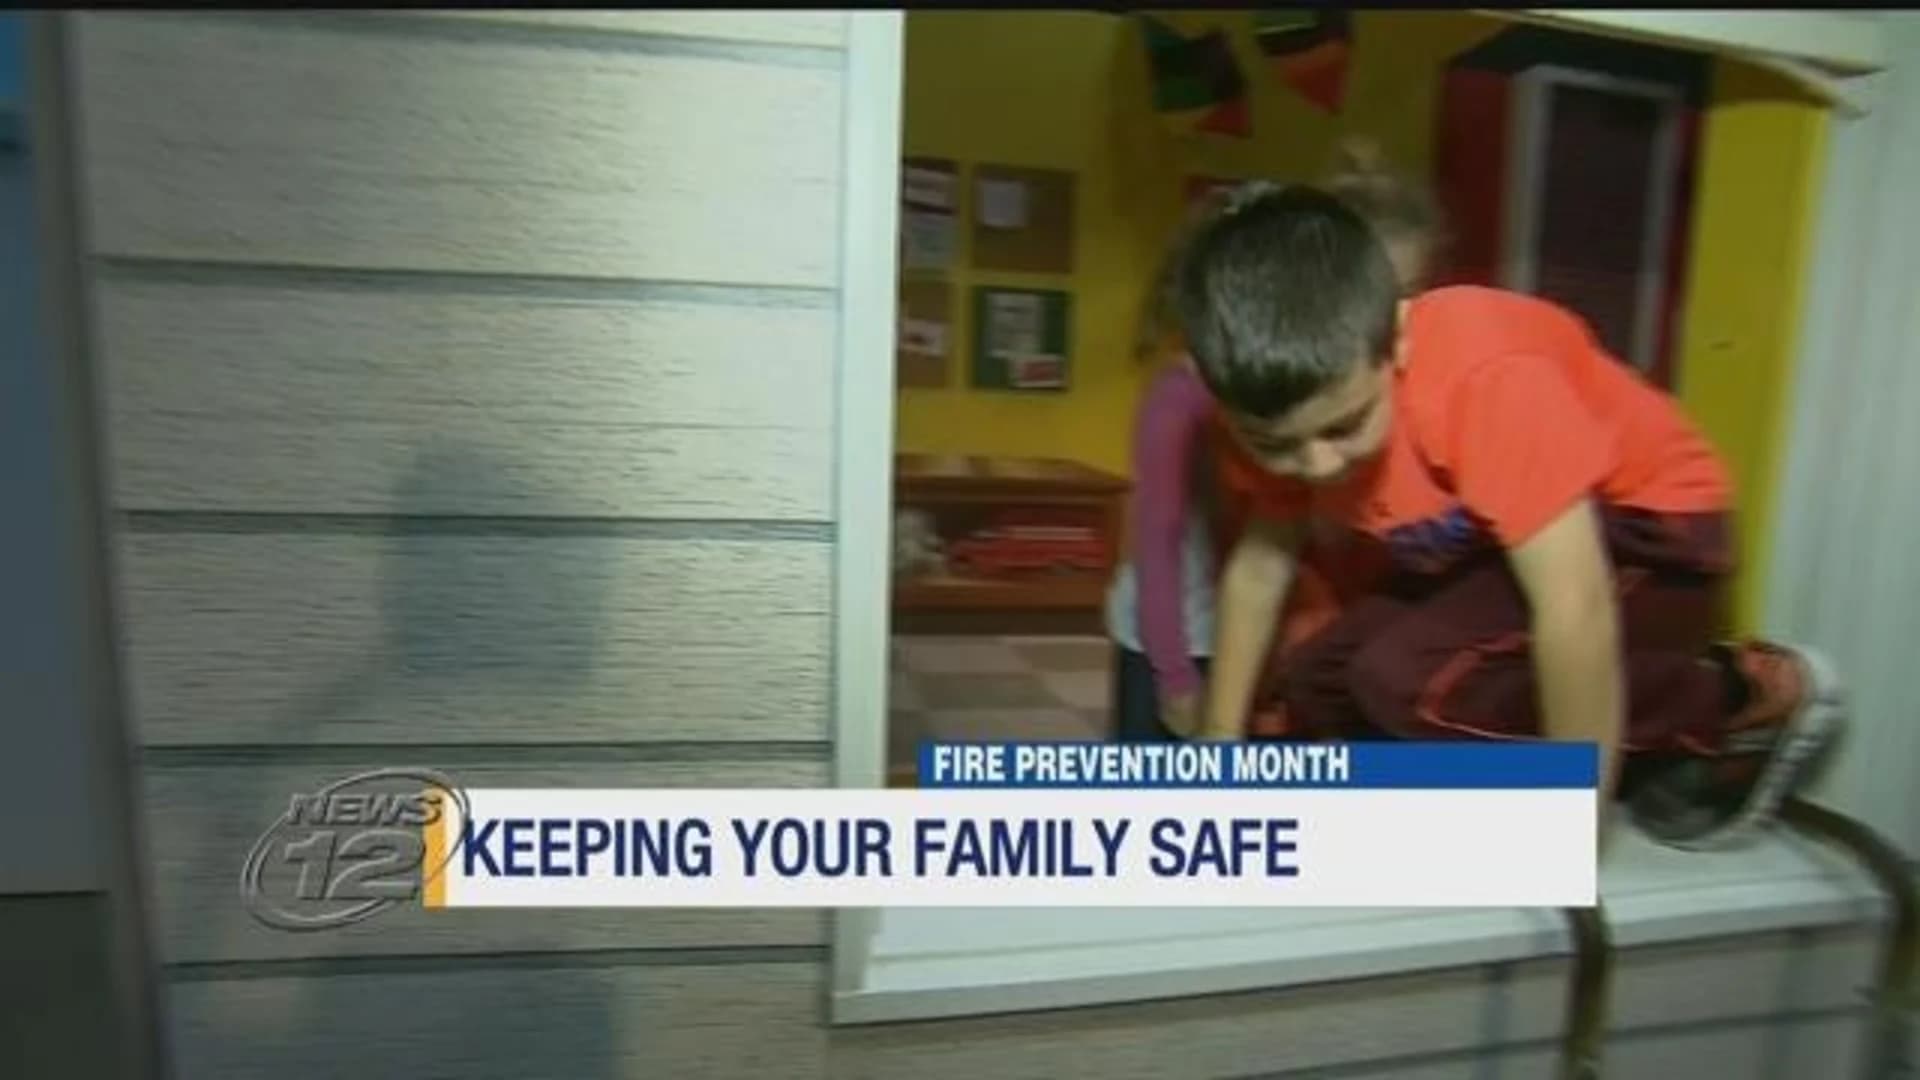 Tips to help keep families safe during Fire Prevention Month